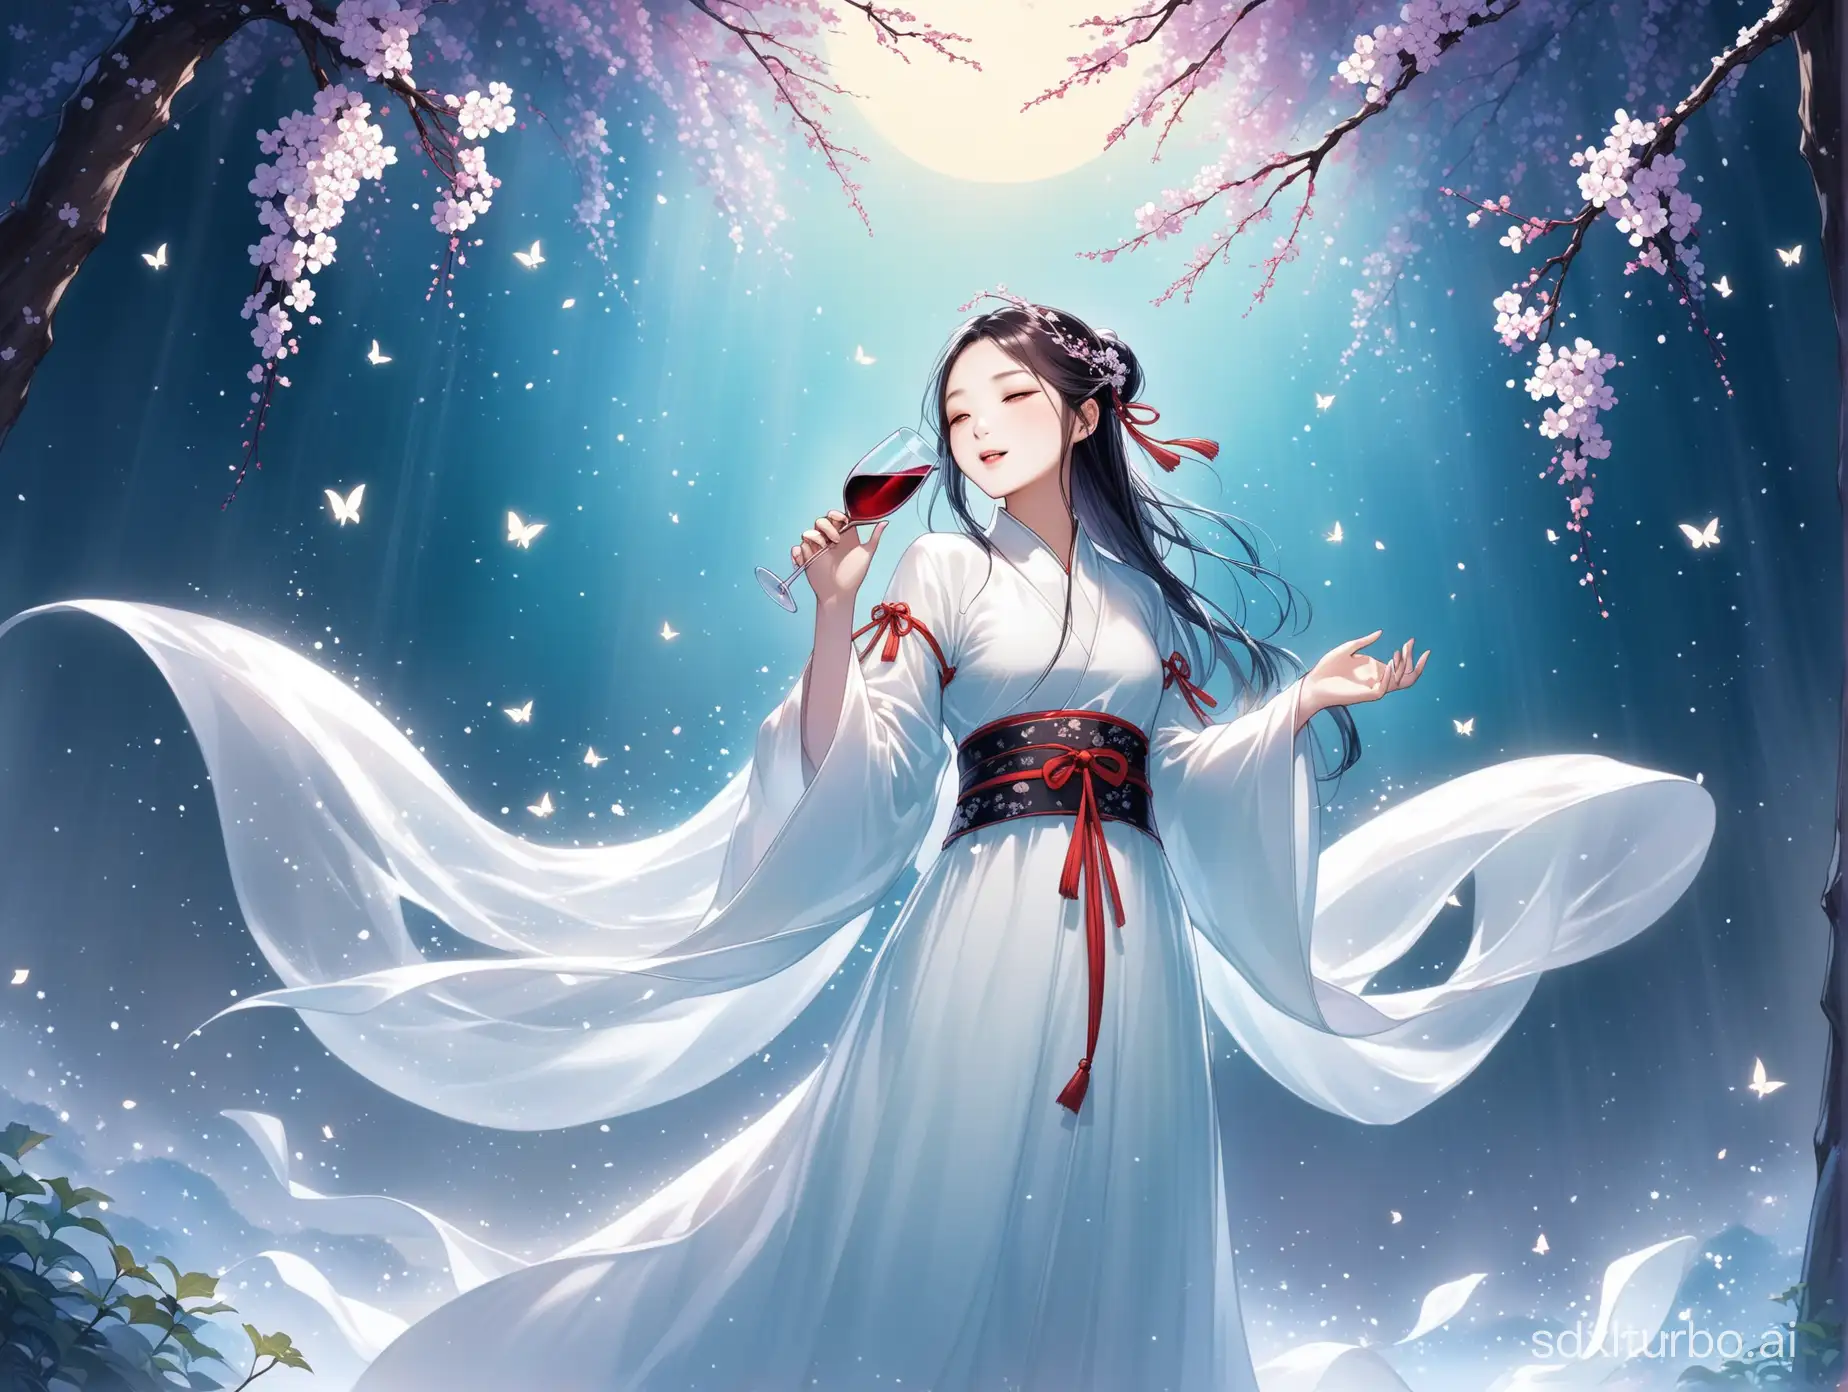 AI poet Li Bai sings to wine in the ethereal emptiness of the fairyland.